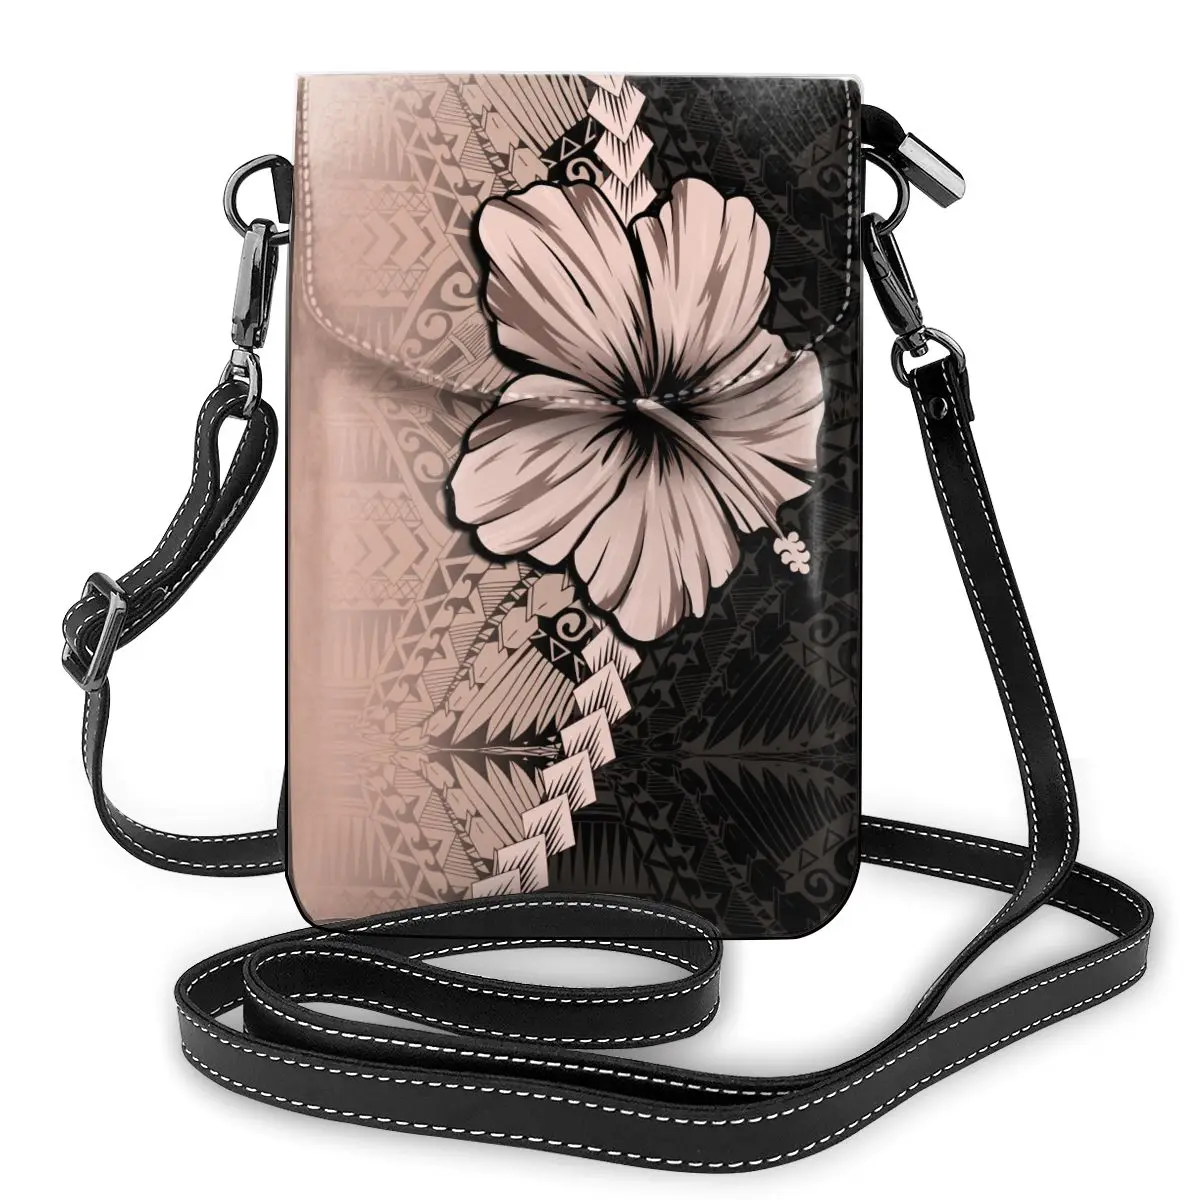 

NOISYDESIGNS Small PU Leather Crossbody Bags Women Hibiscus With Polynesian Trend Phone Bag Women's Shoulder Handbags Flap Purse